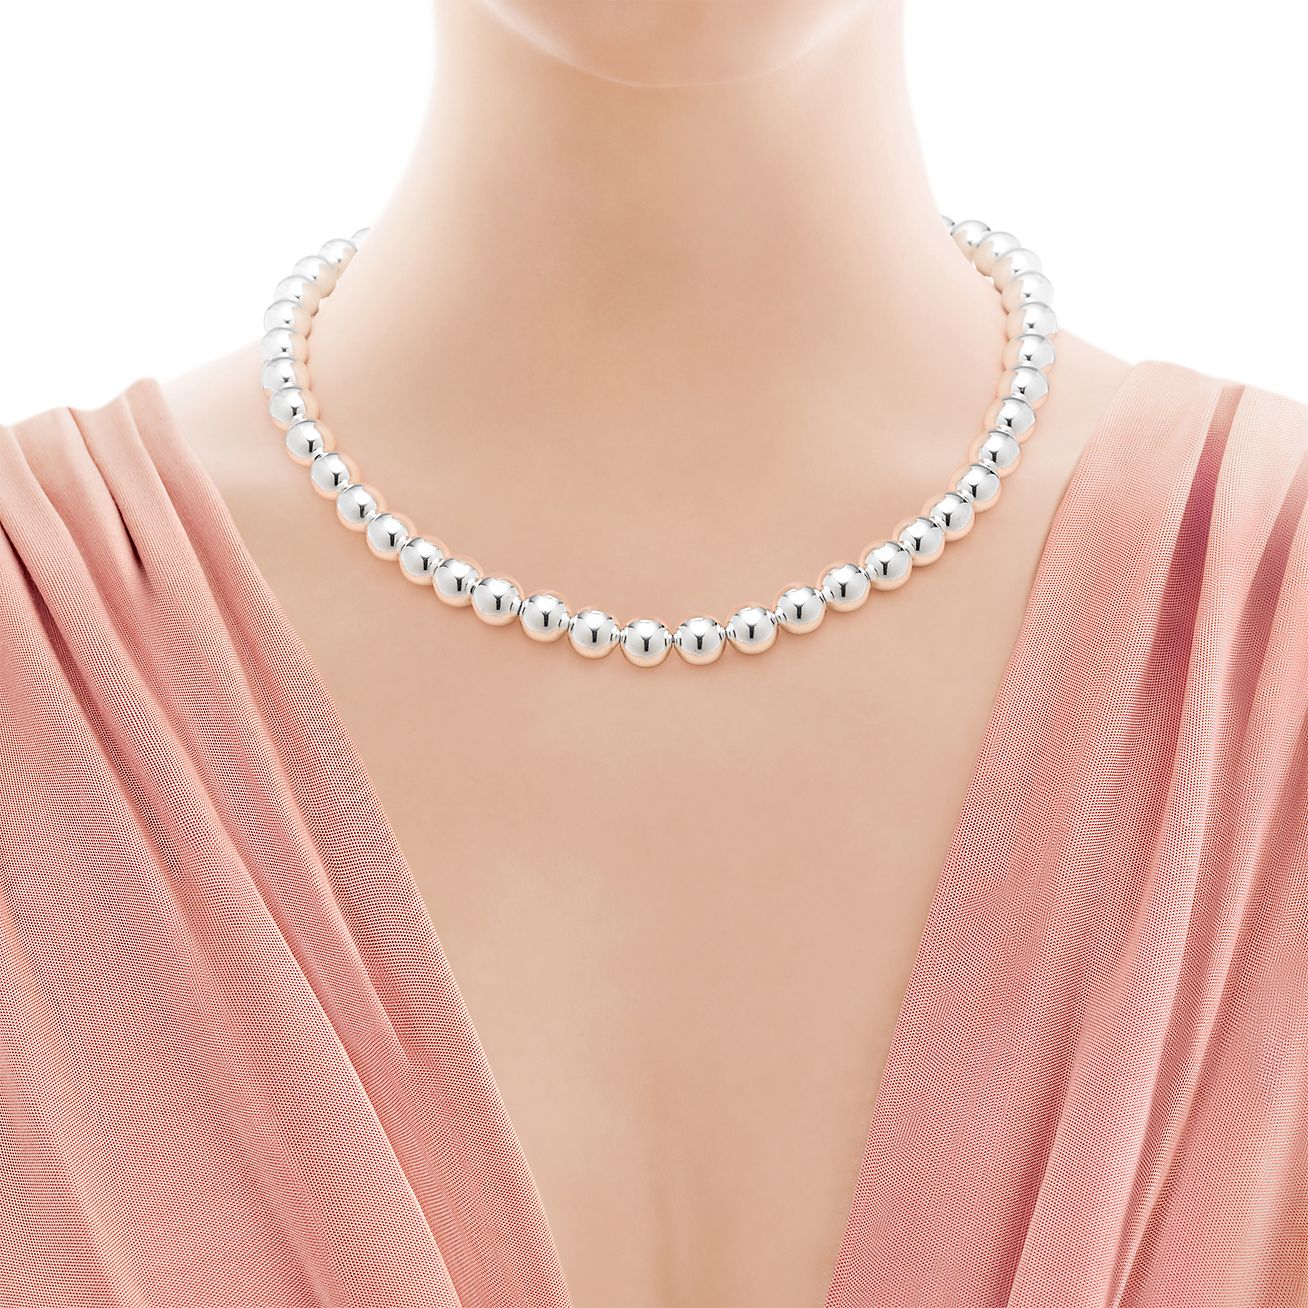 tiffany ball and chain necklace